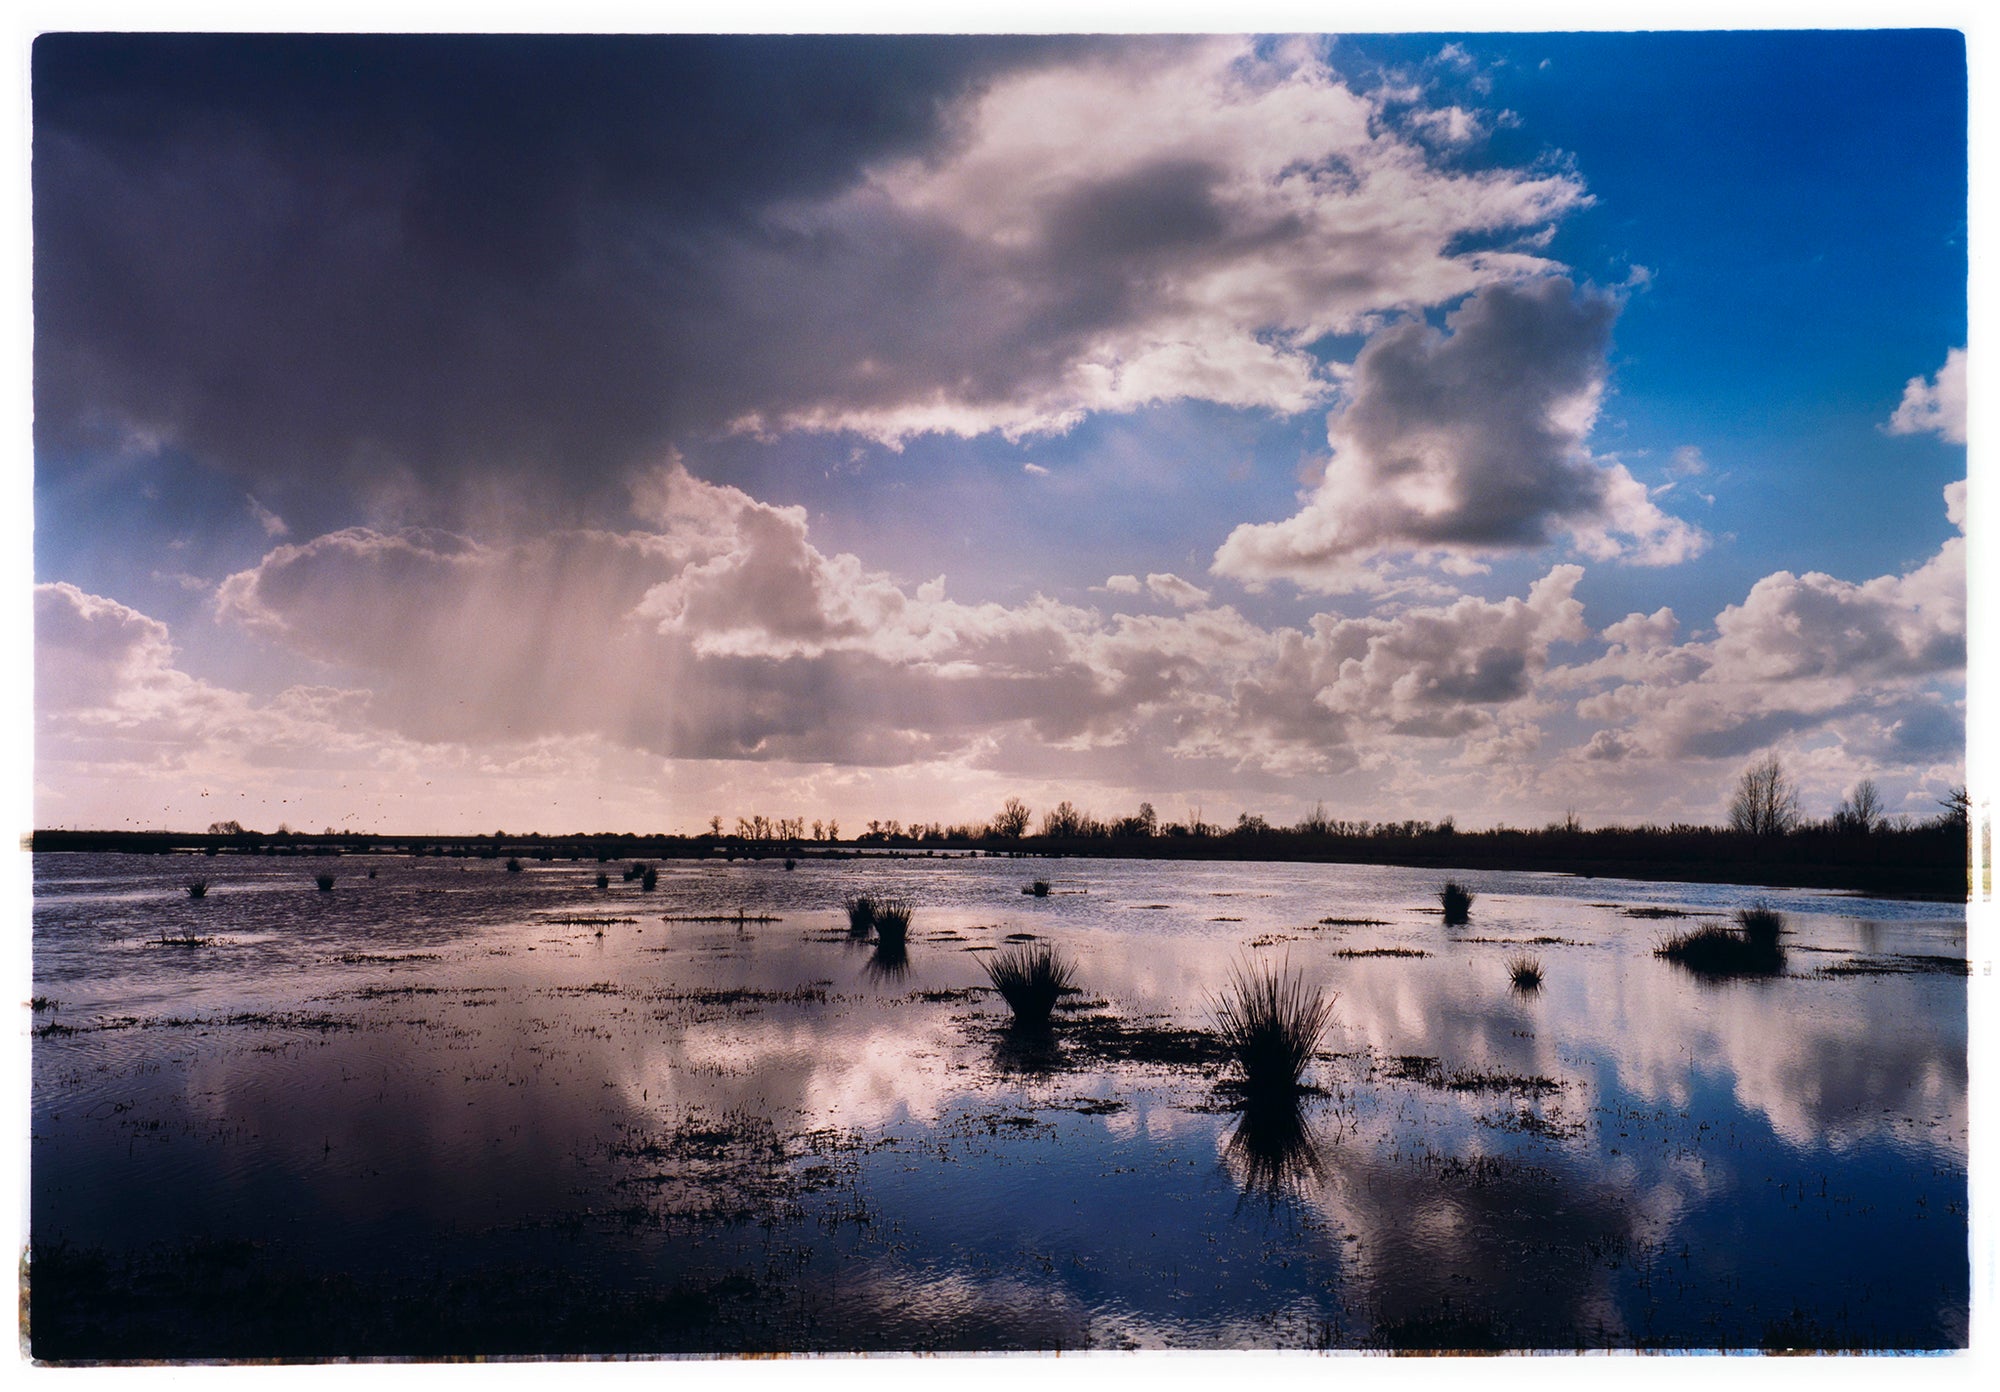 Photograph by Richard Heeps. Fenland expanse with water and tufts of grass and an expansive fenland sky, blue with white and grey clouds reflected in the water below.